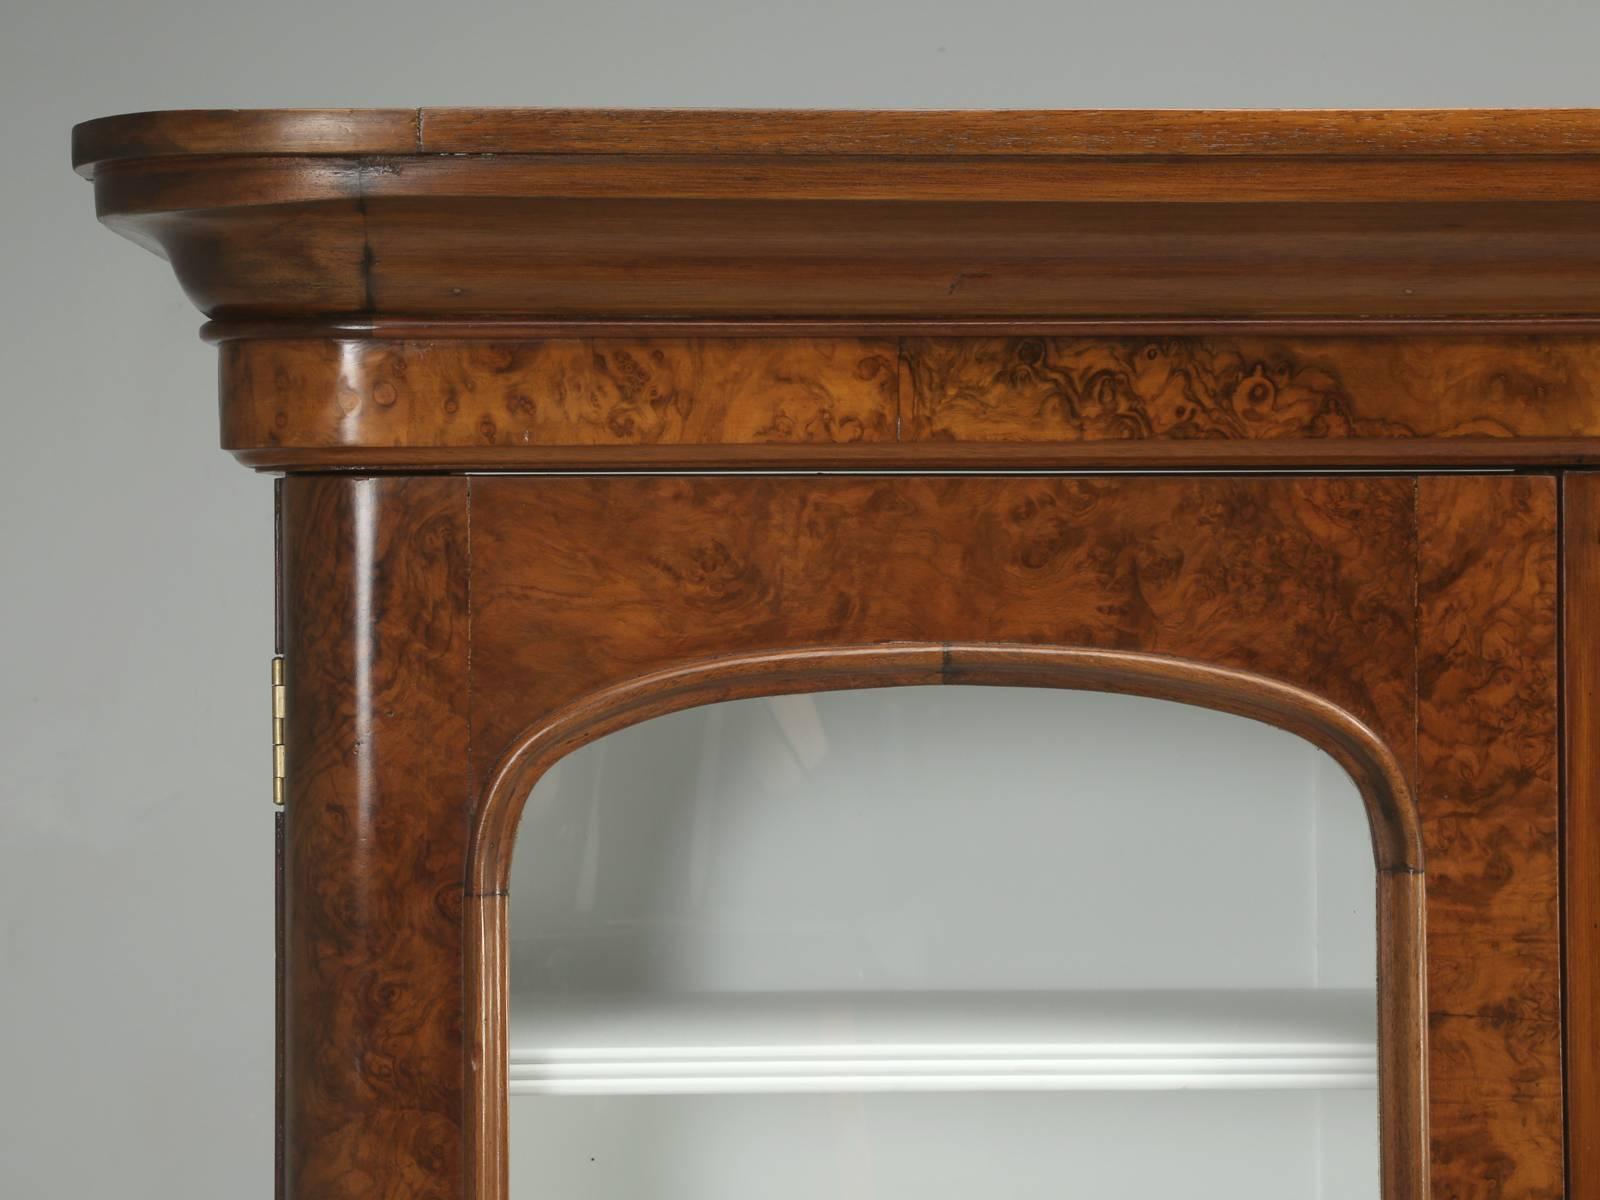 Hand-Crafted Antique English Burl Walnut Bookcase, circa Late 1800s and Correctly Restored